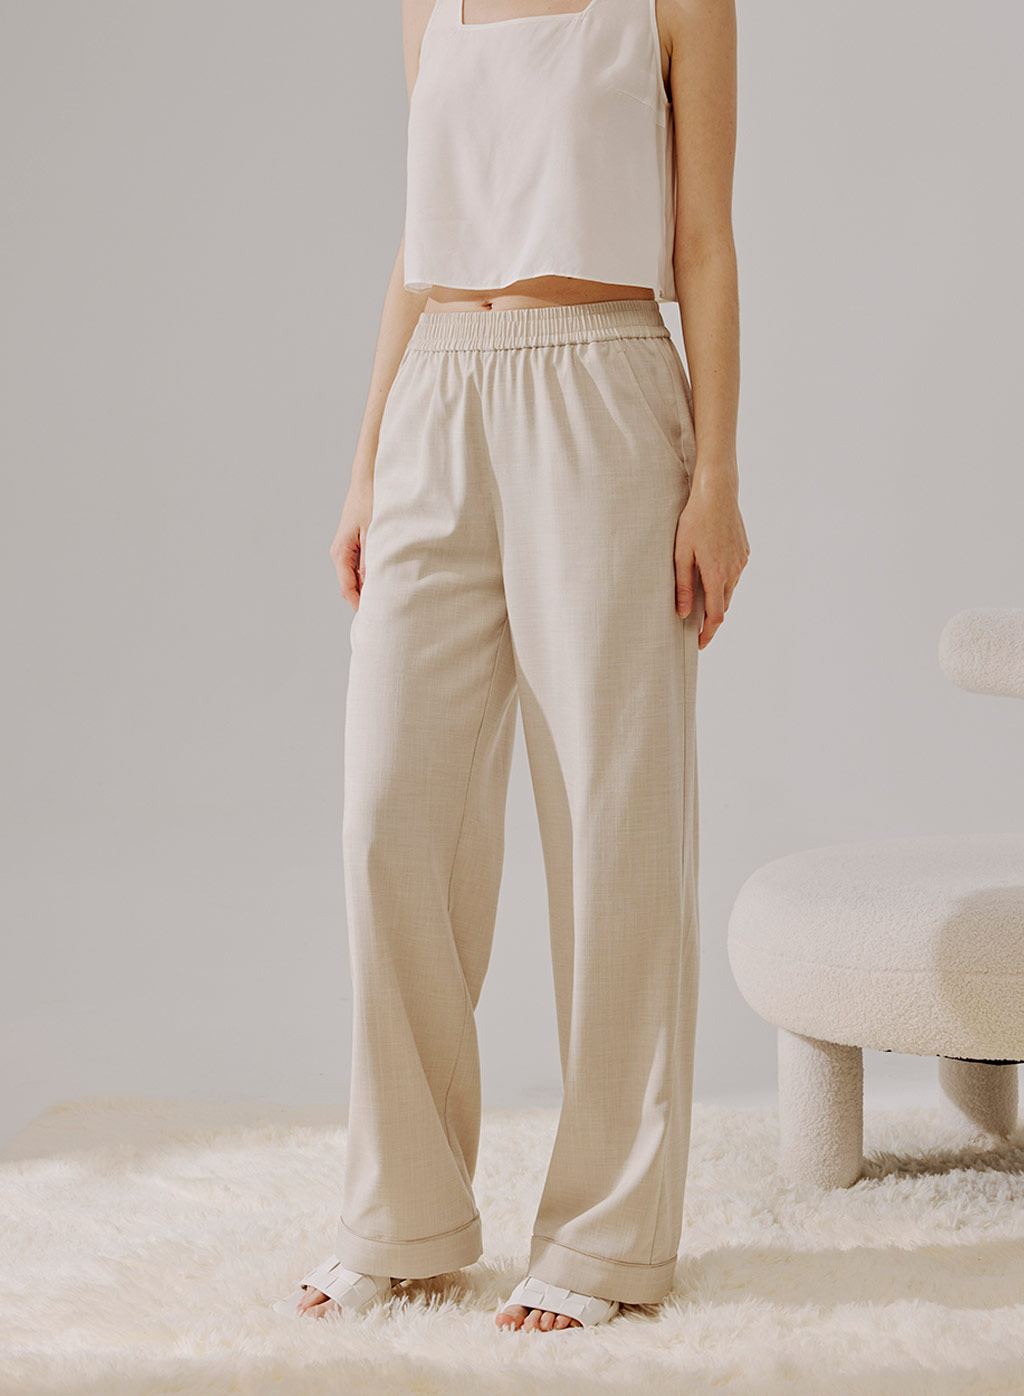 https://naploungewear.com/wp-content/uploads/2021/12/Relaxed-Wide-Cut-Trousers-Lily-White-1.jpg